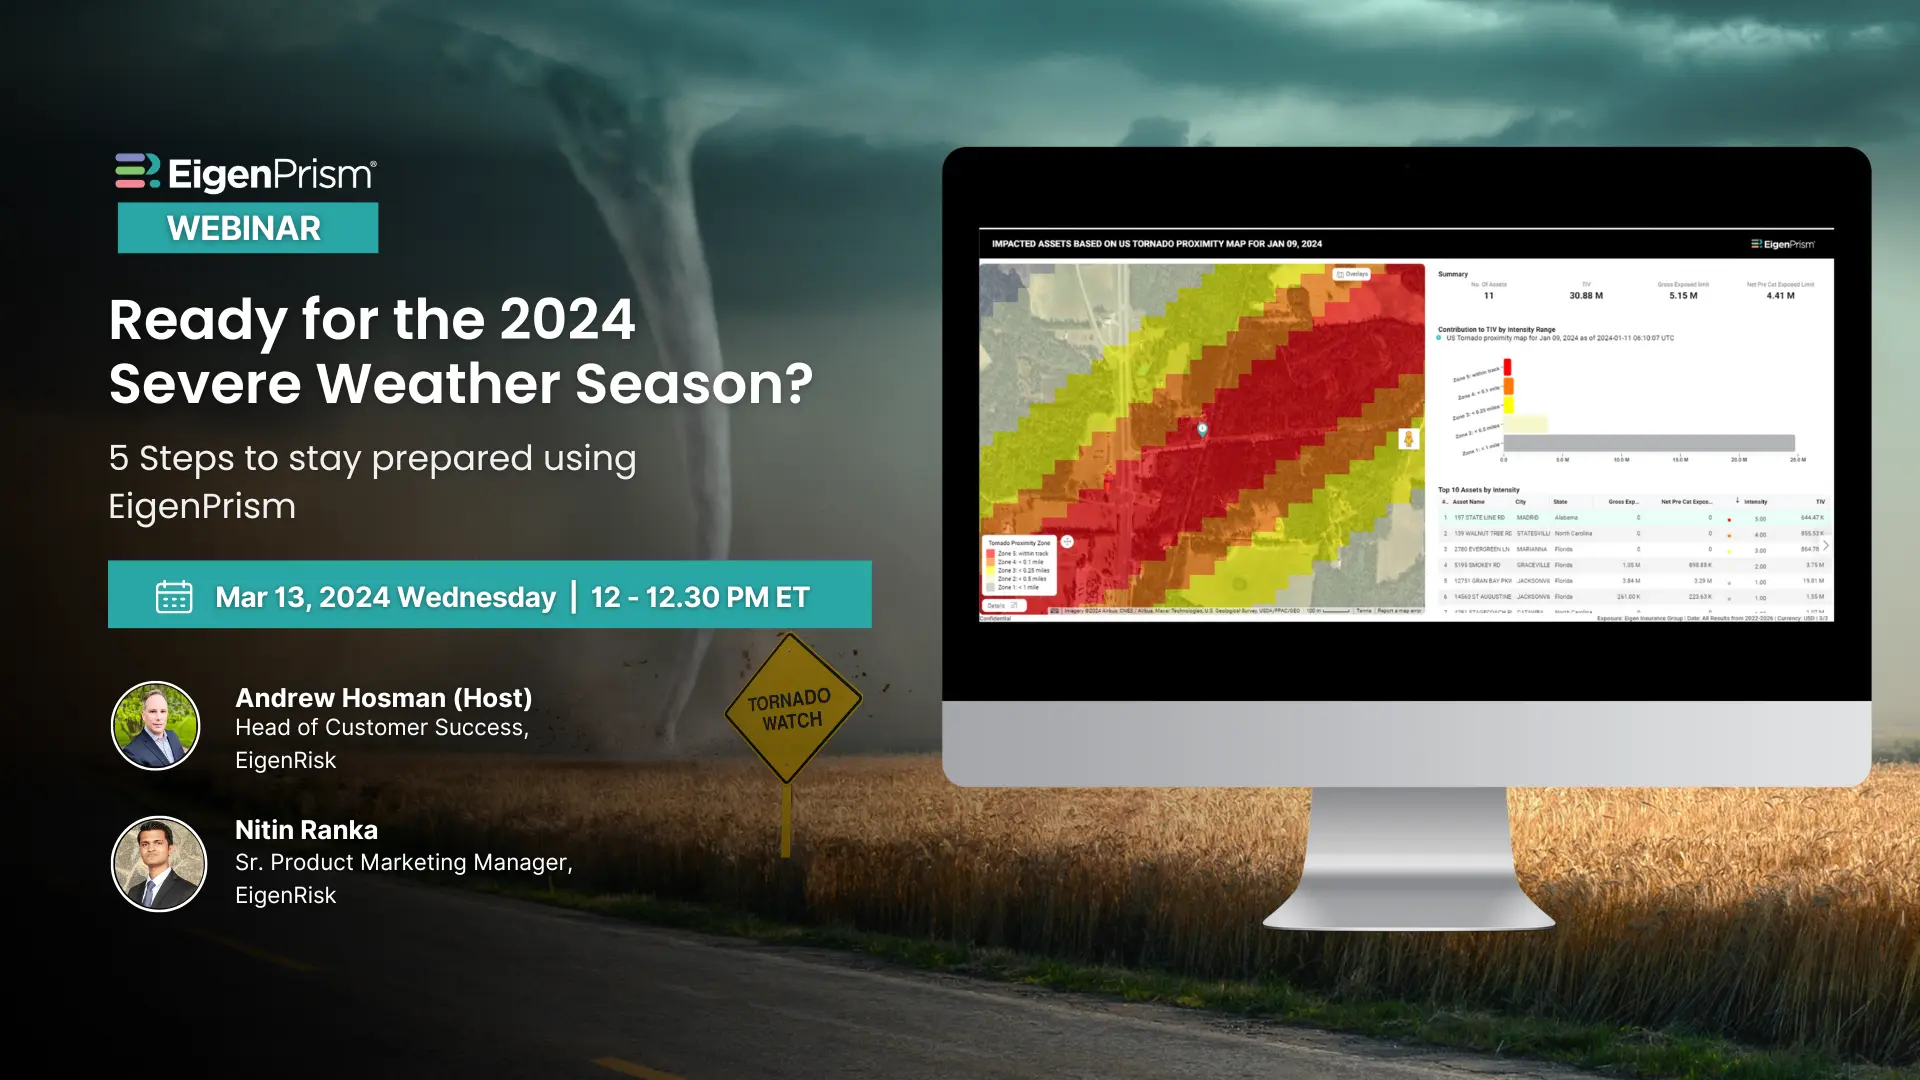 Webinar on Ready for the 2024 Severe Weather Season?